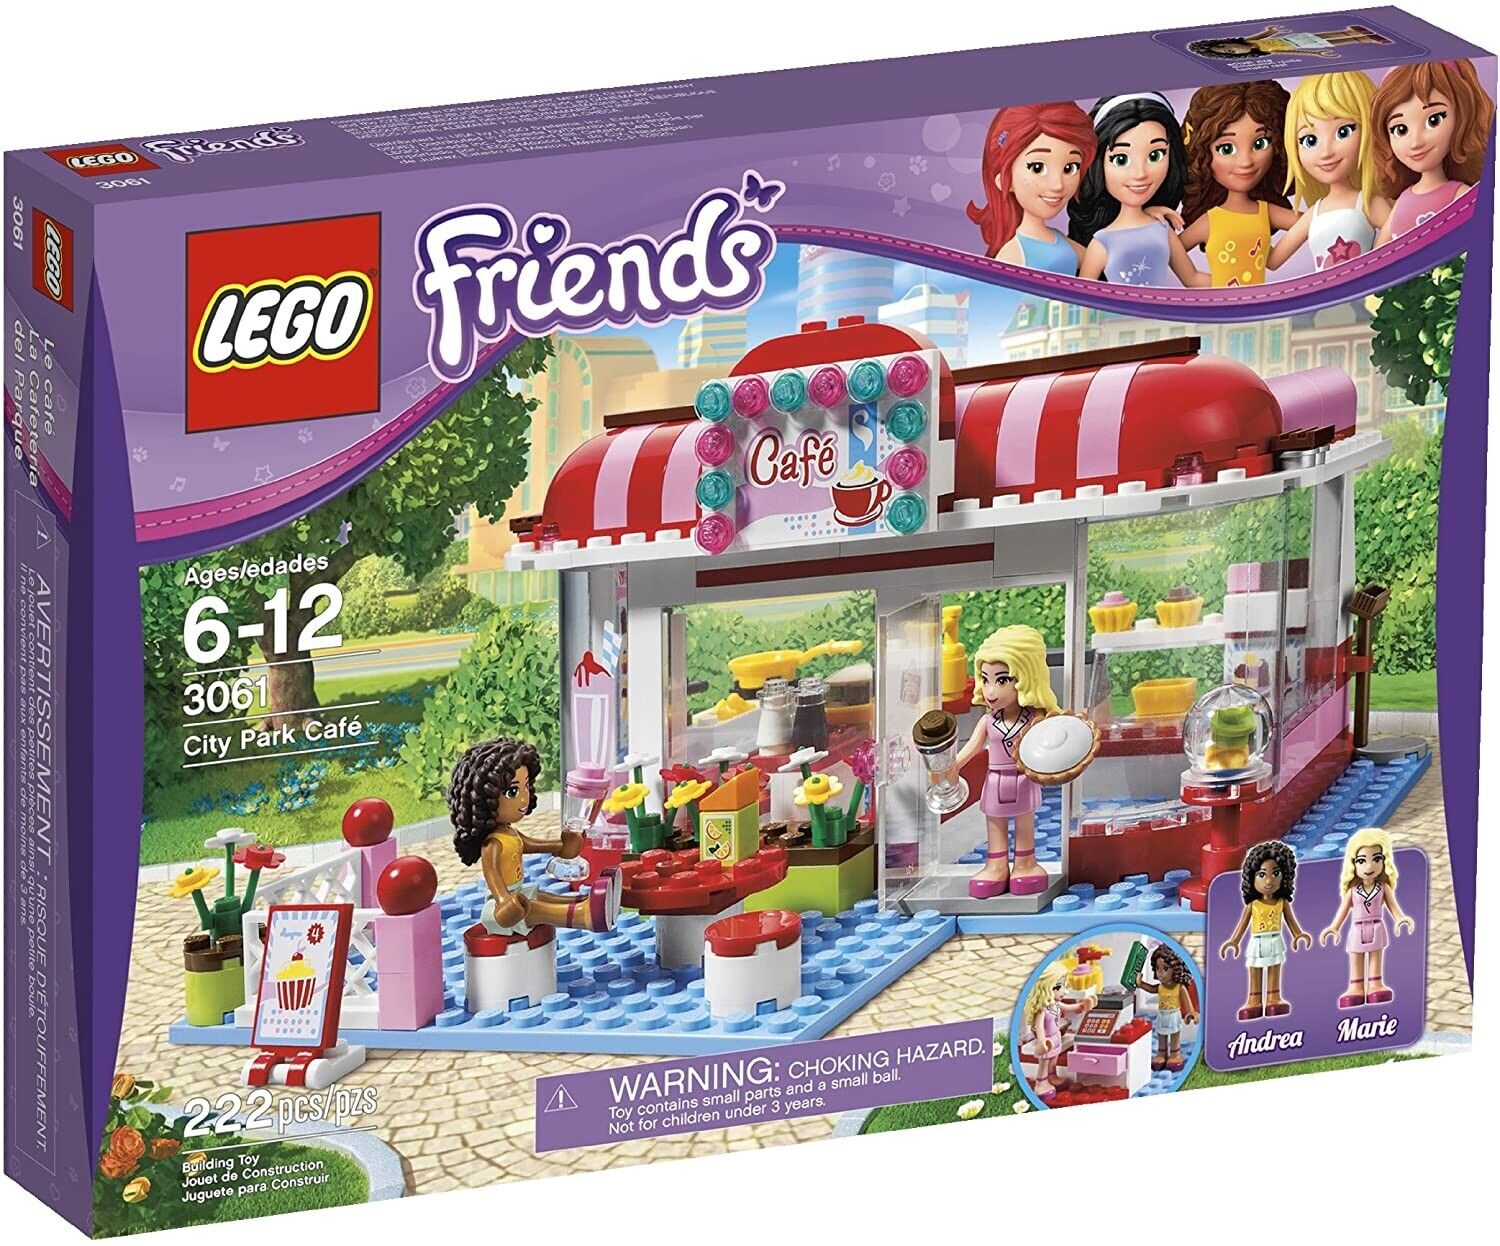 LEGO FRIENDS CITY PARK CAFE 3061 NEW Factory SEALED